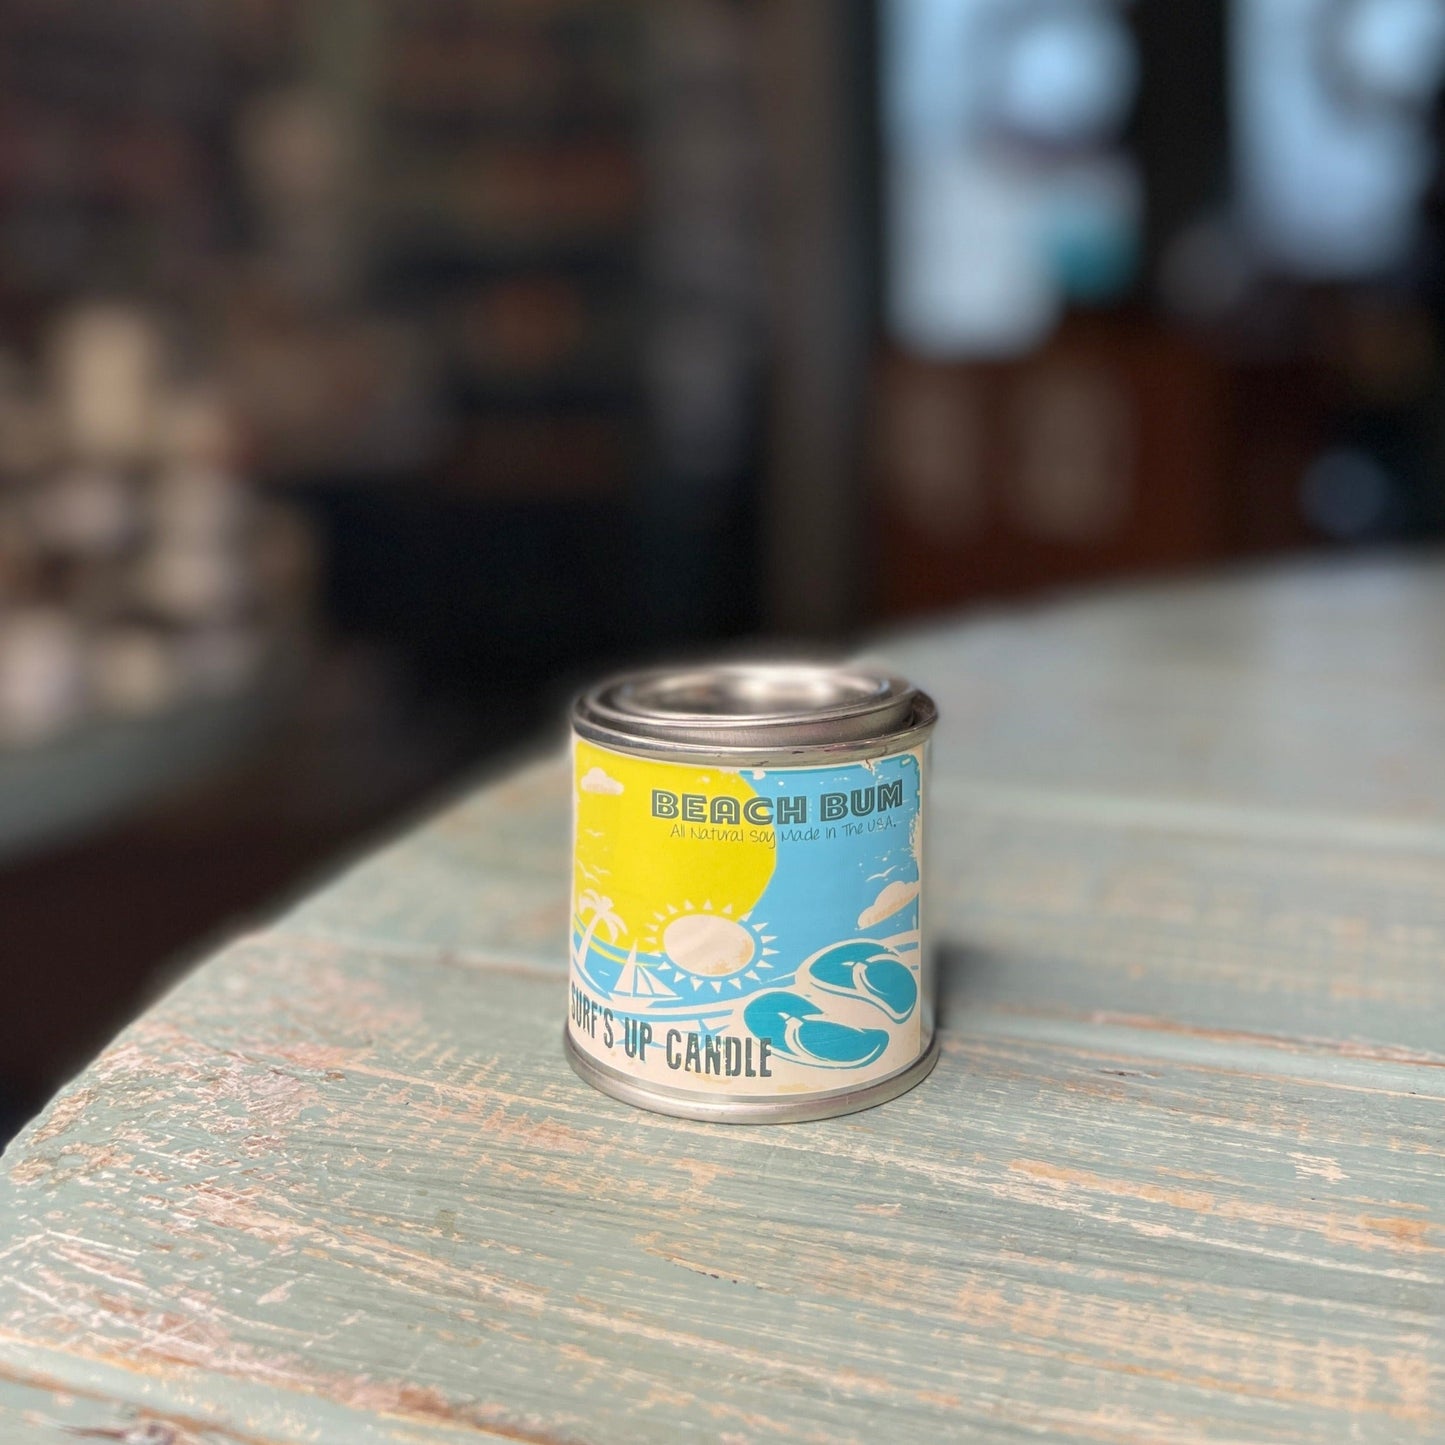 Beach Bum Paint Can Candle - Vintage Collection